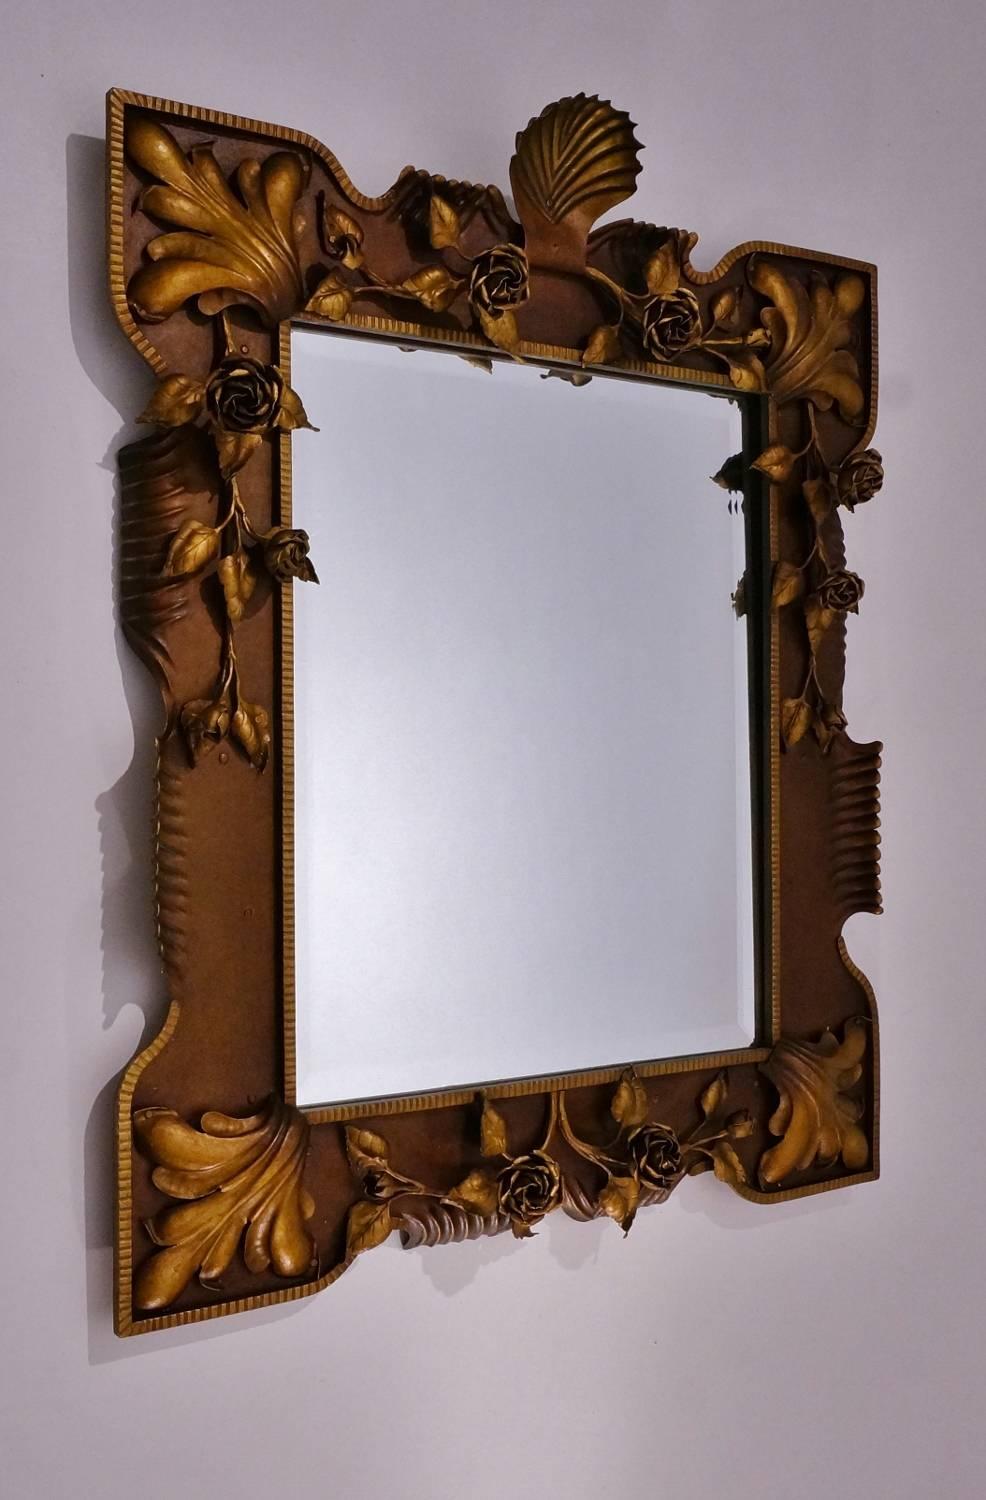 Italian floral gilded tole mirror, neoclassical frame with 12 handmade metal roses, circa 1940s.

This mirror has been thoroughly cleaned while respecting the antique patina.

This unique 1940s wall mirror with a border of tole metal roses is